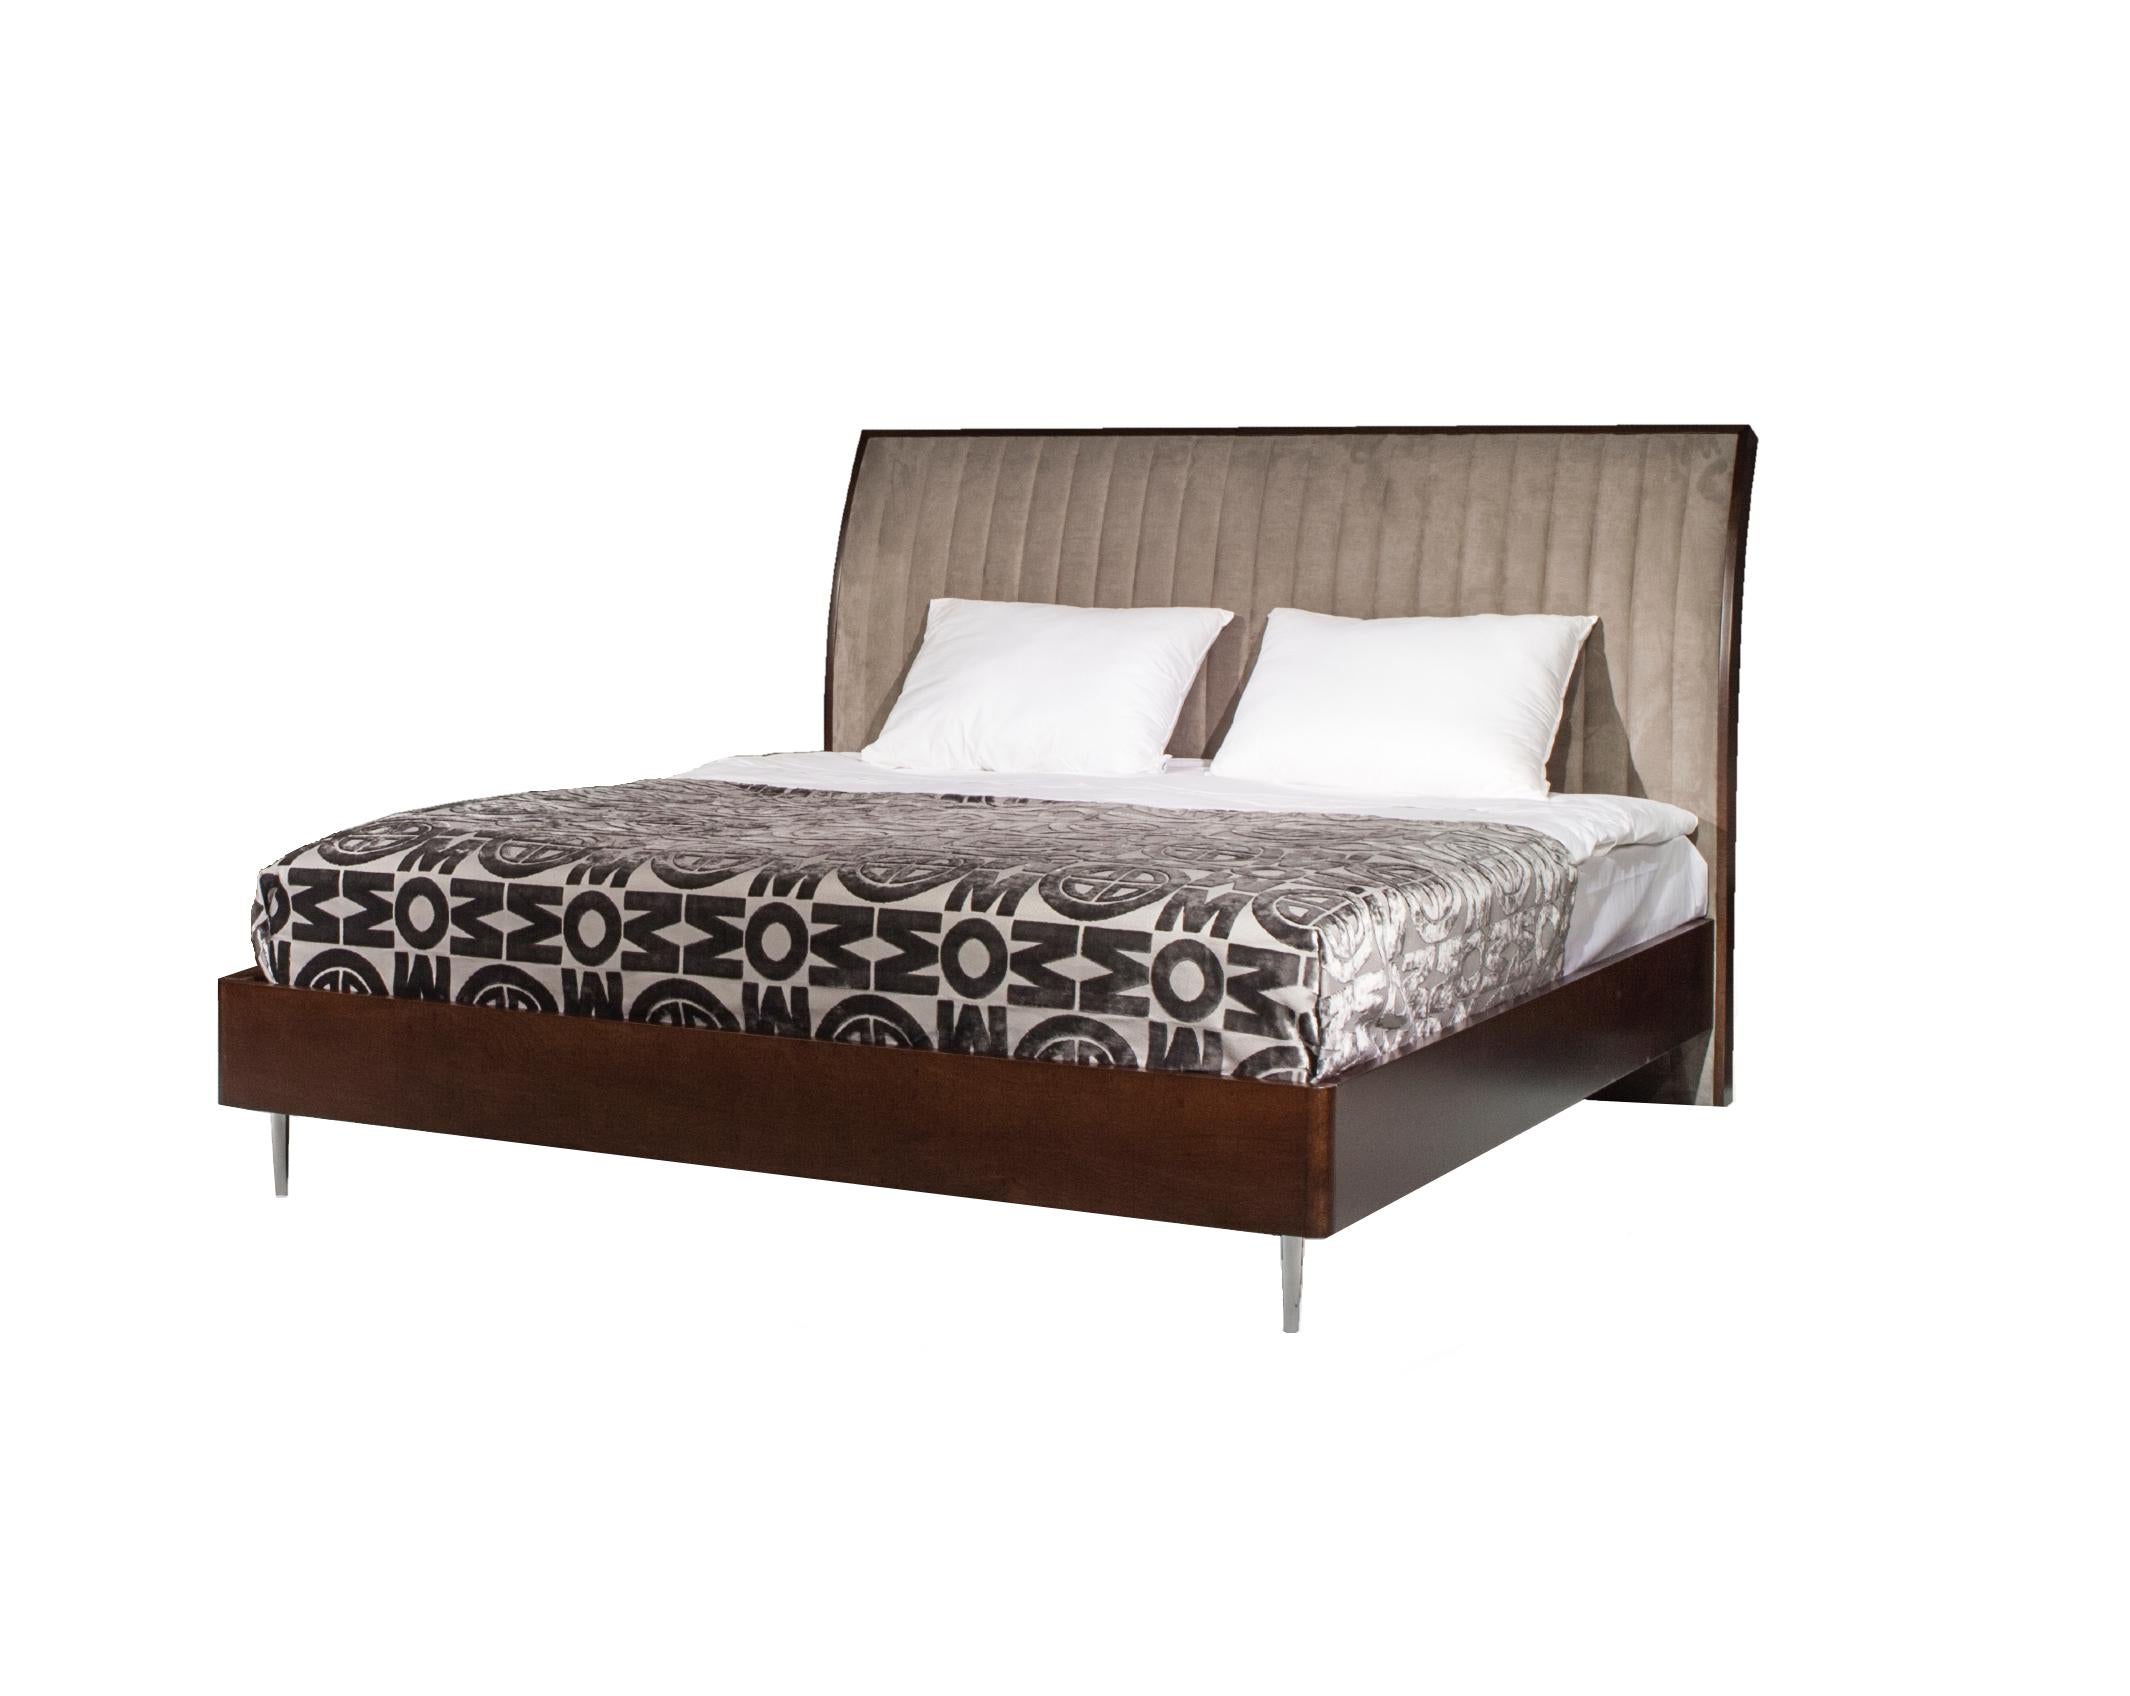 The Versa bed marries a plush channel tufted headboard with wood base on metal legs, giving ample opportunities to mix the finishes to make it your own.